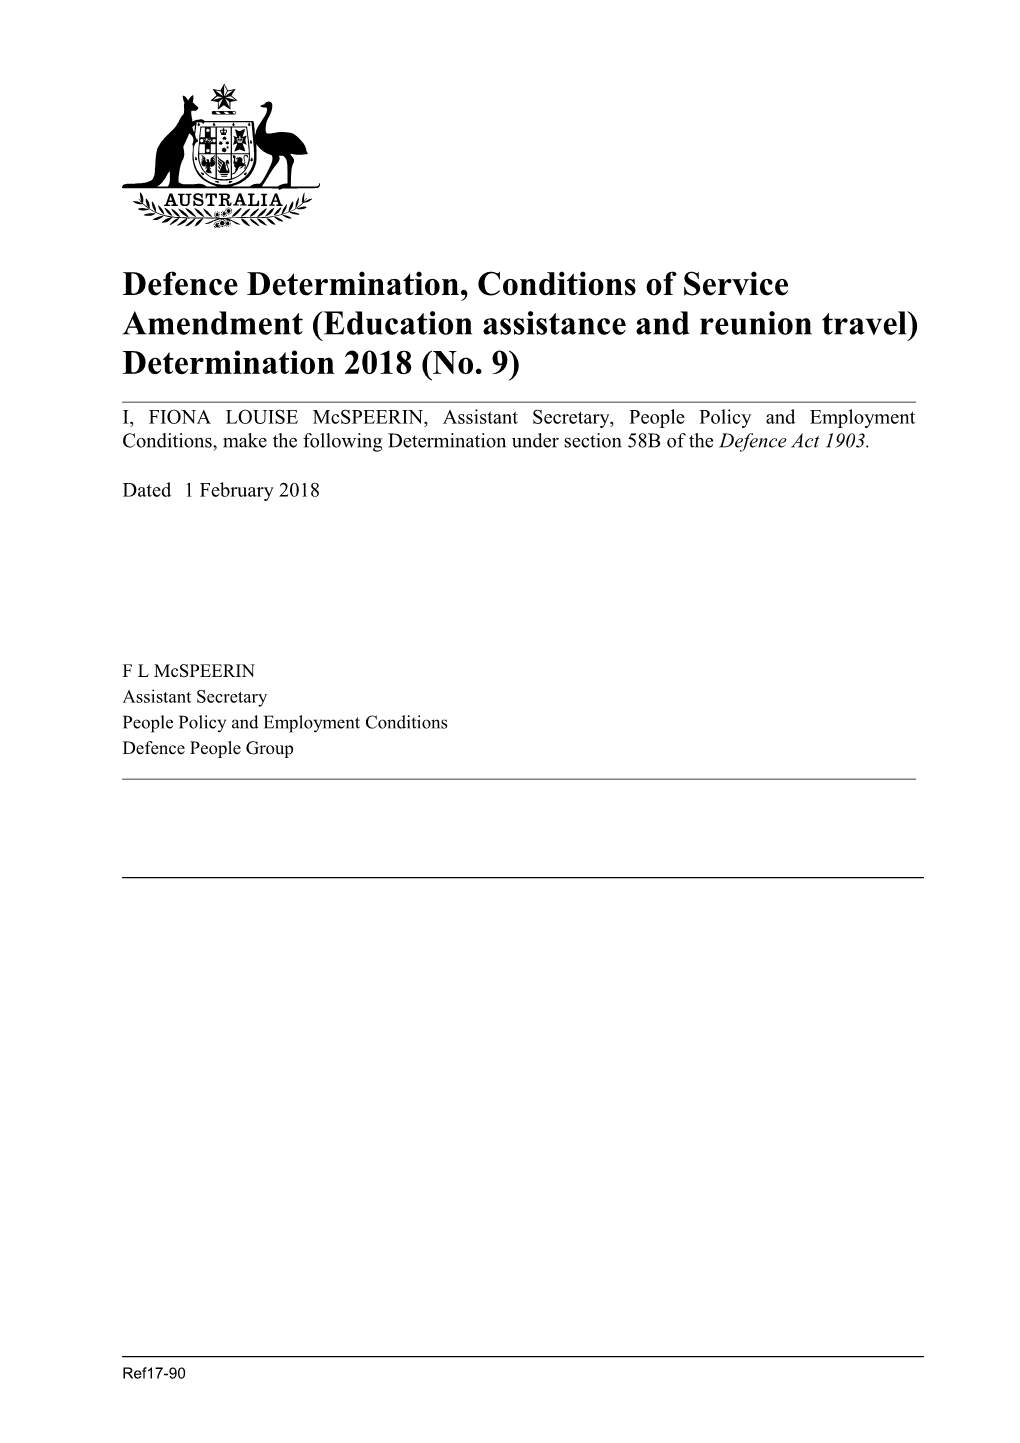 Defence Determination, Conditions of Service Amendment (Education Assistance and Reunion